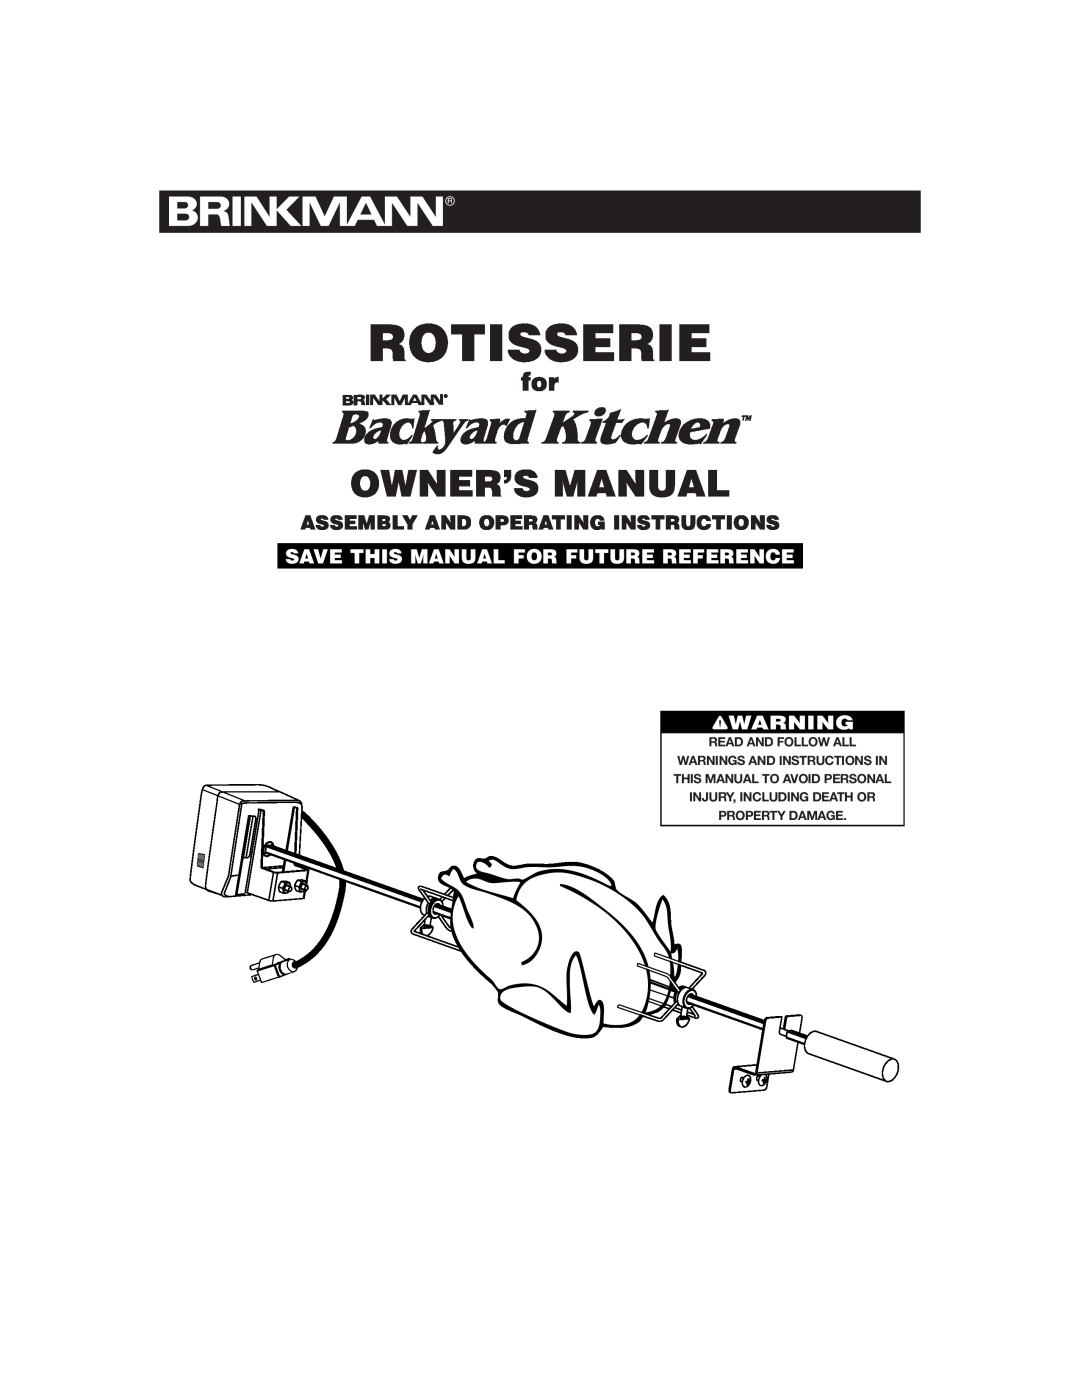 Brinkmann ROTISSERIE owner manual Rotisserie, Assembly And Operating Instructions, Save This Manual For Future Reference 